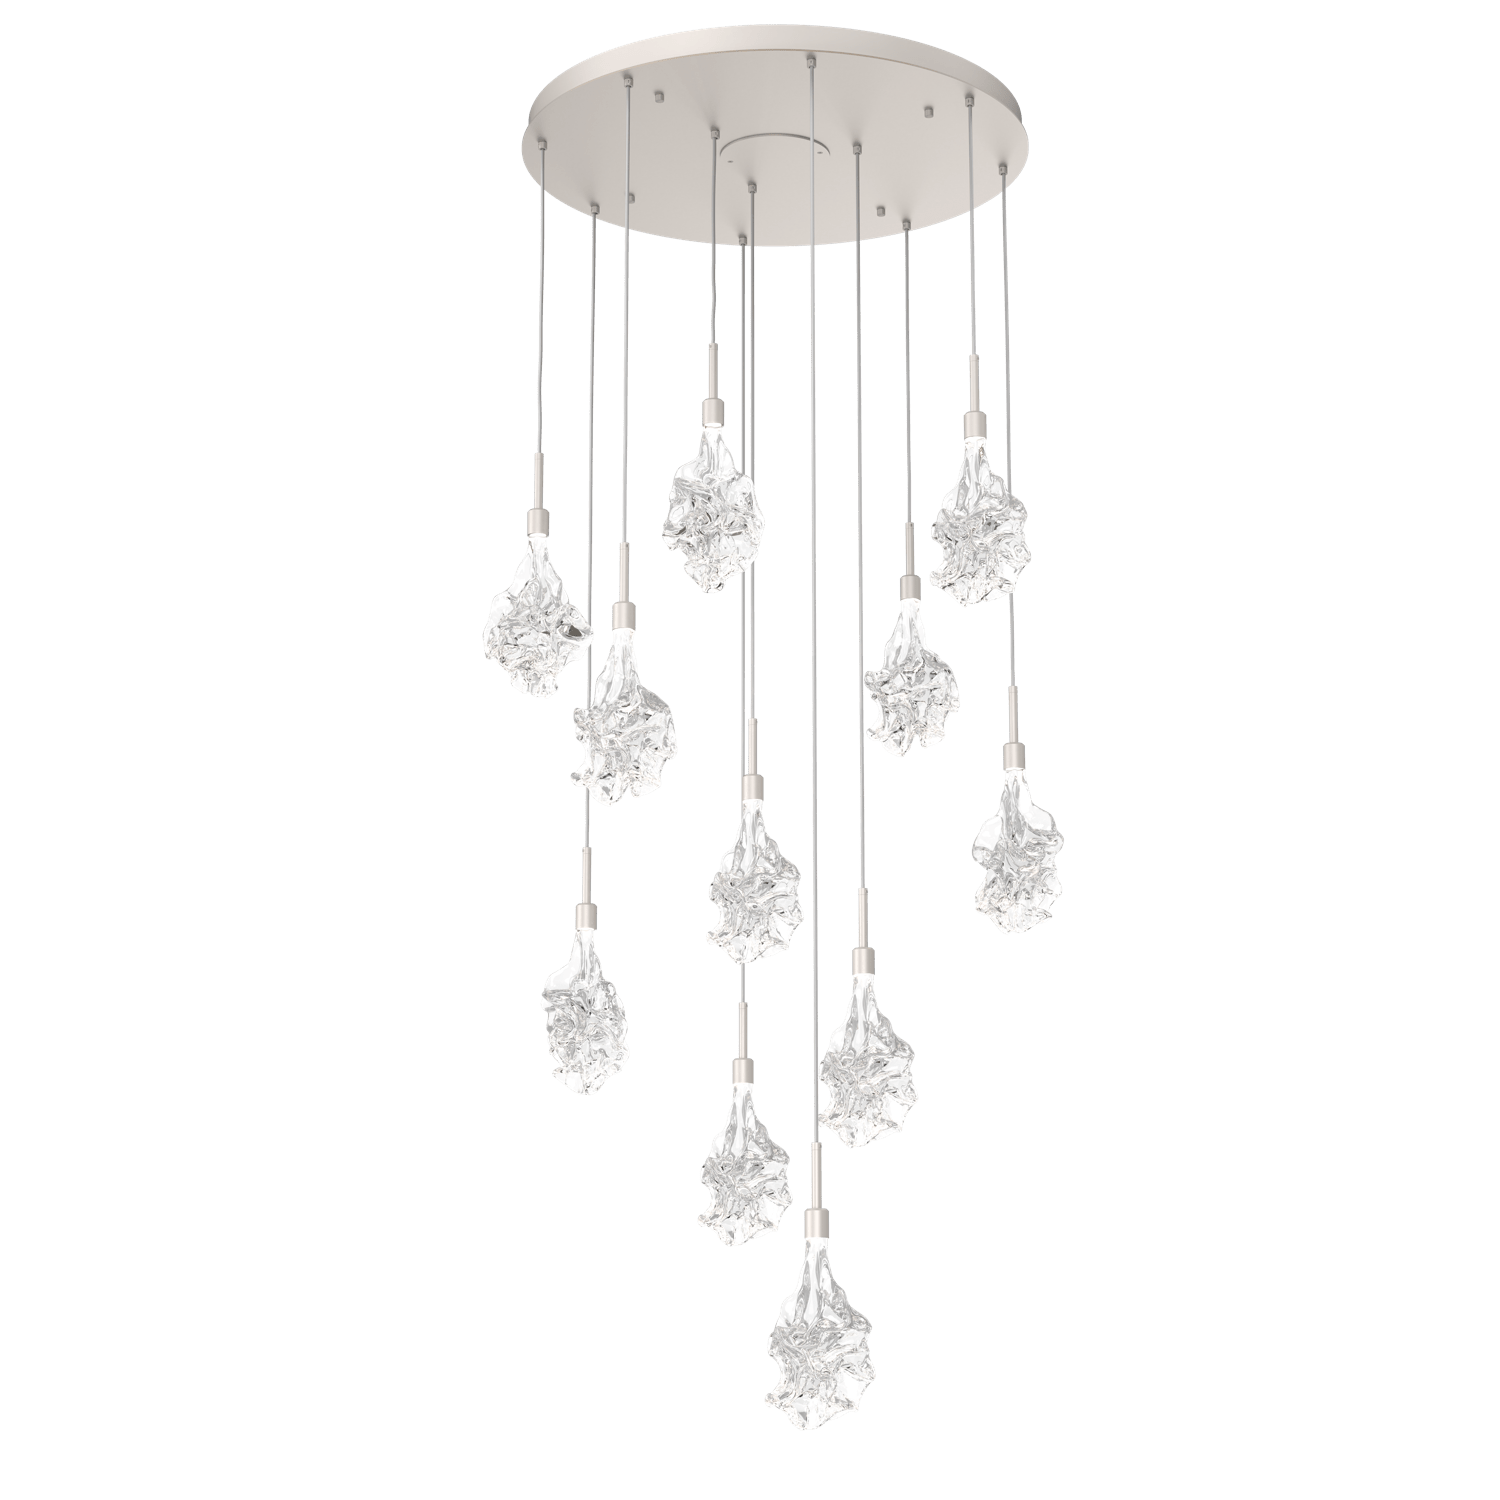 CHB0059-11-BS-Hammerton-Studio-Blossom-11-light-round-pendant-chandelier-with-metallic-beige-silver-finish-and-clear-handblown-crystal-glass-shades-and-LED-lamping